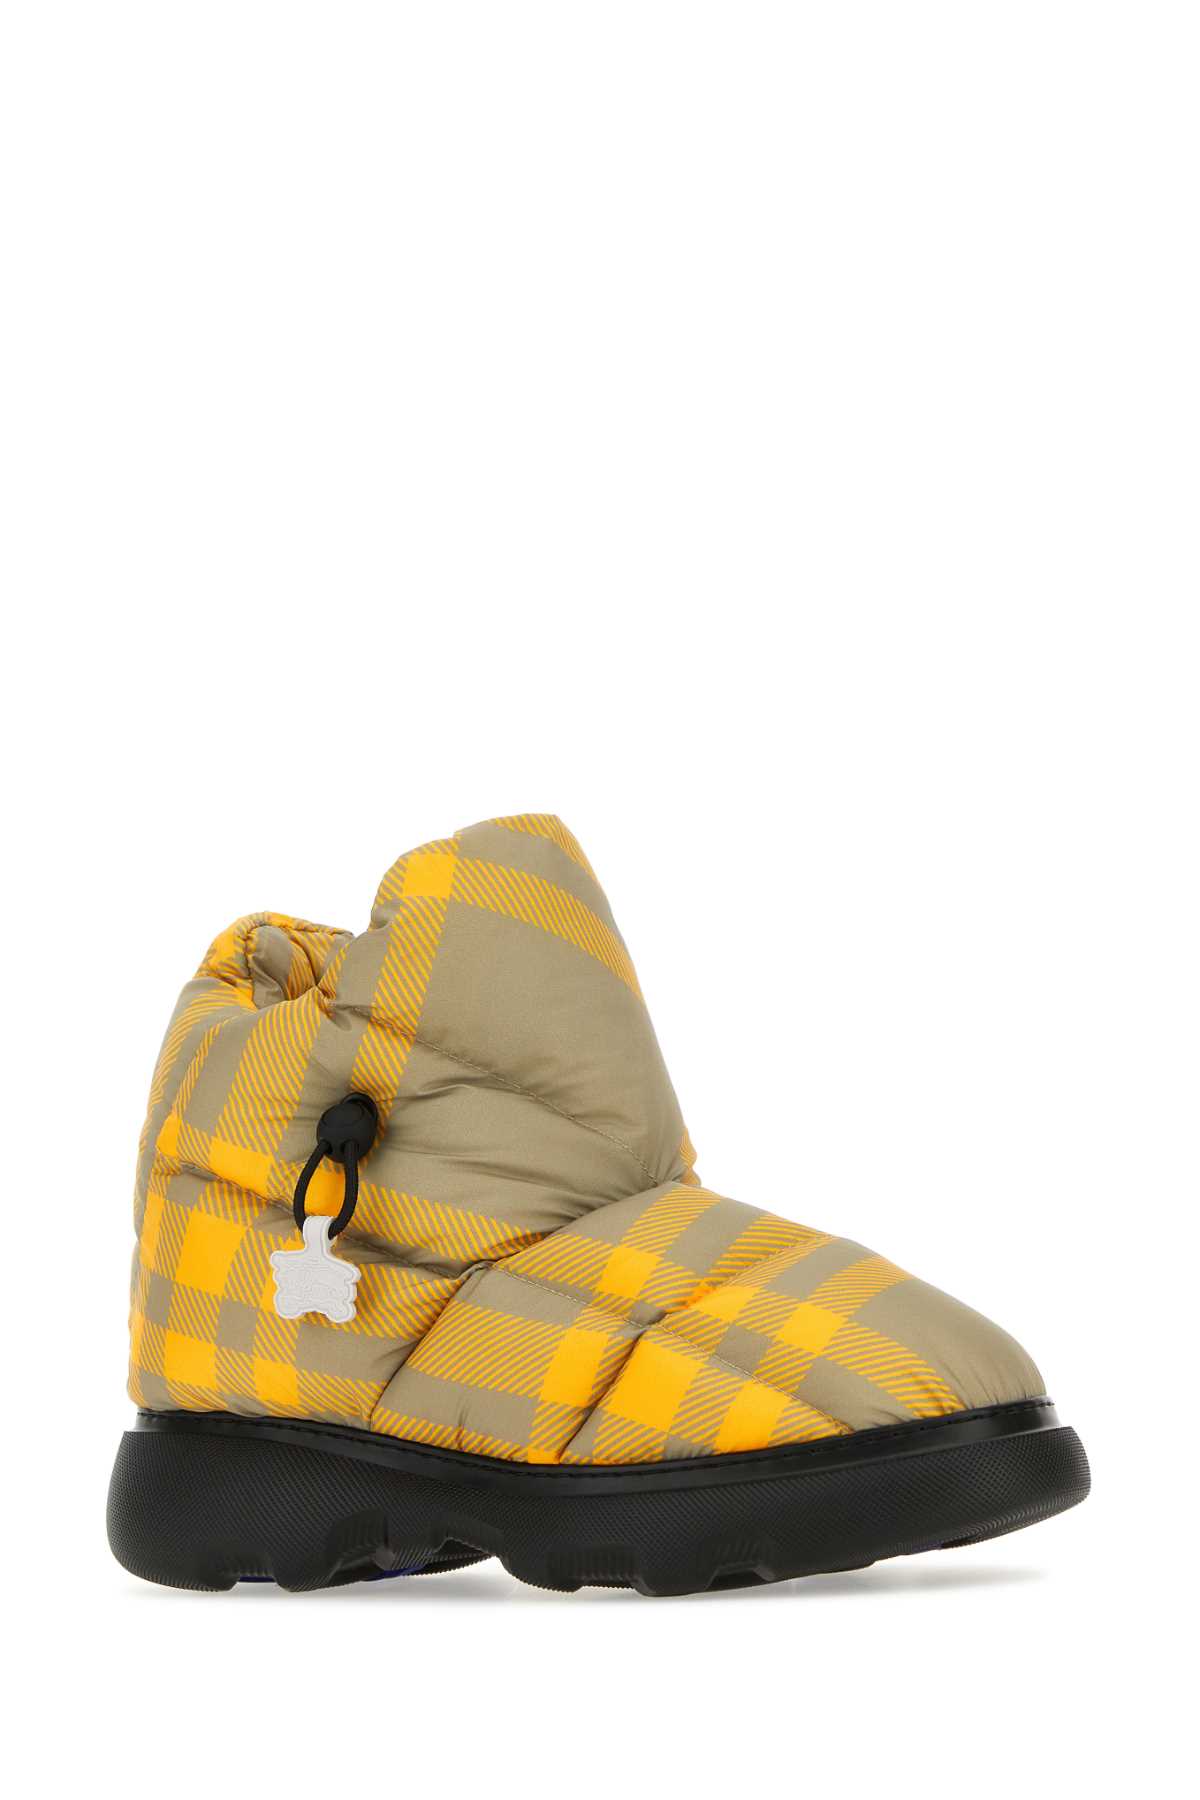 Burberry Printed Polyester Pillow Check Ankle Boots In Hunteripchk